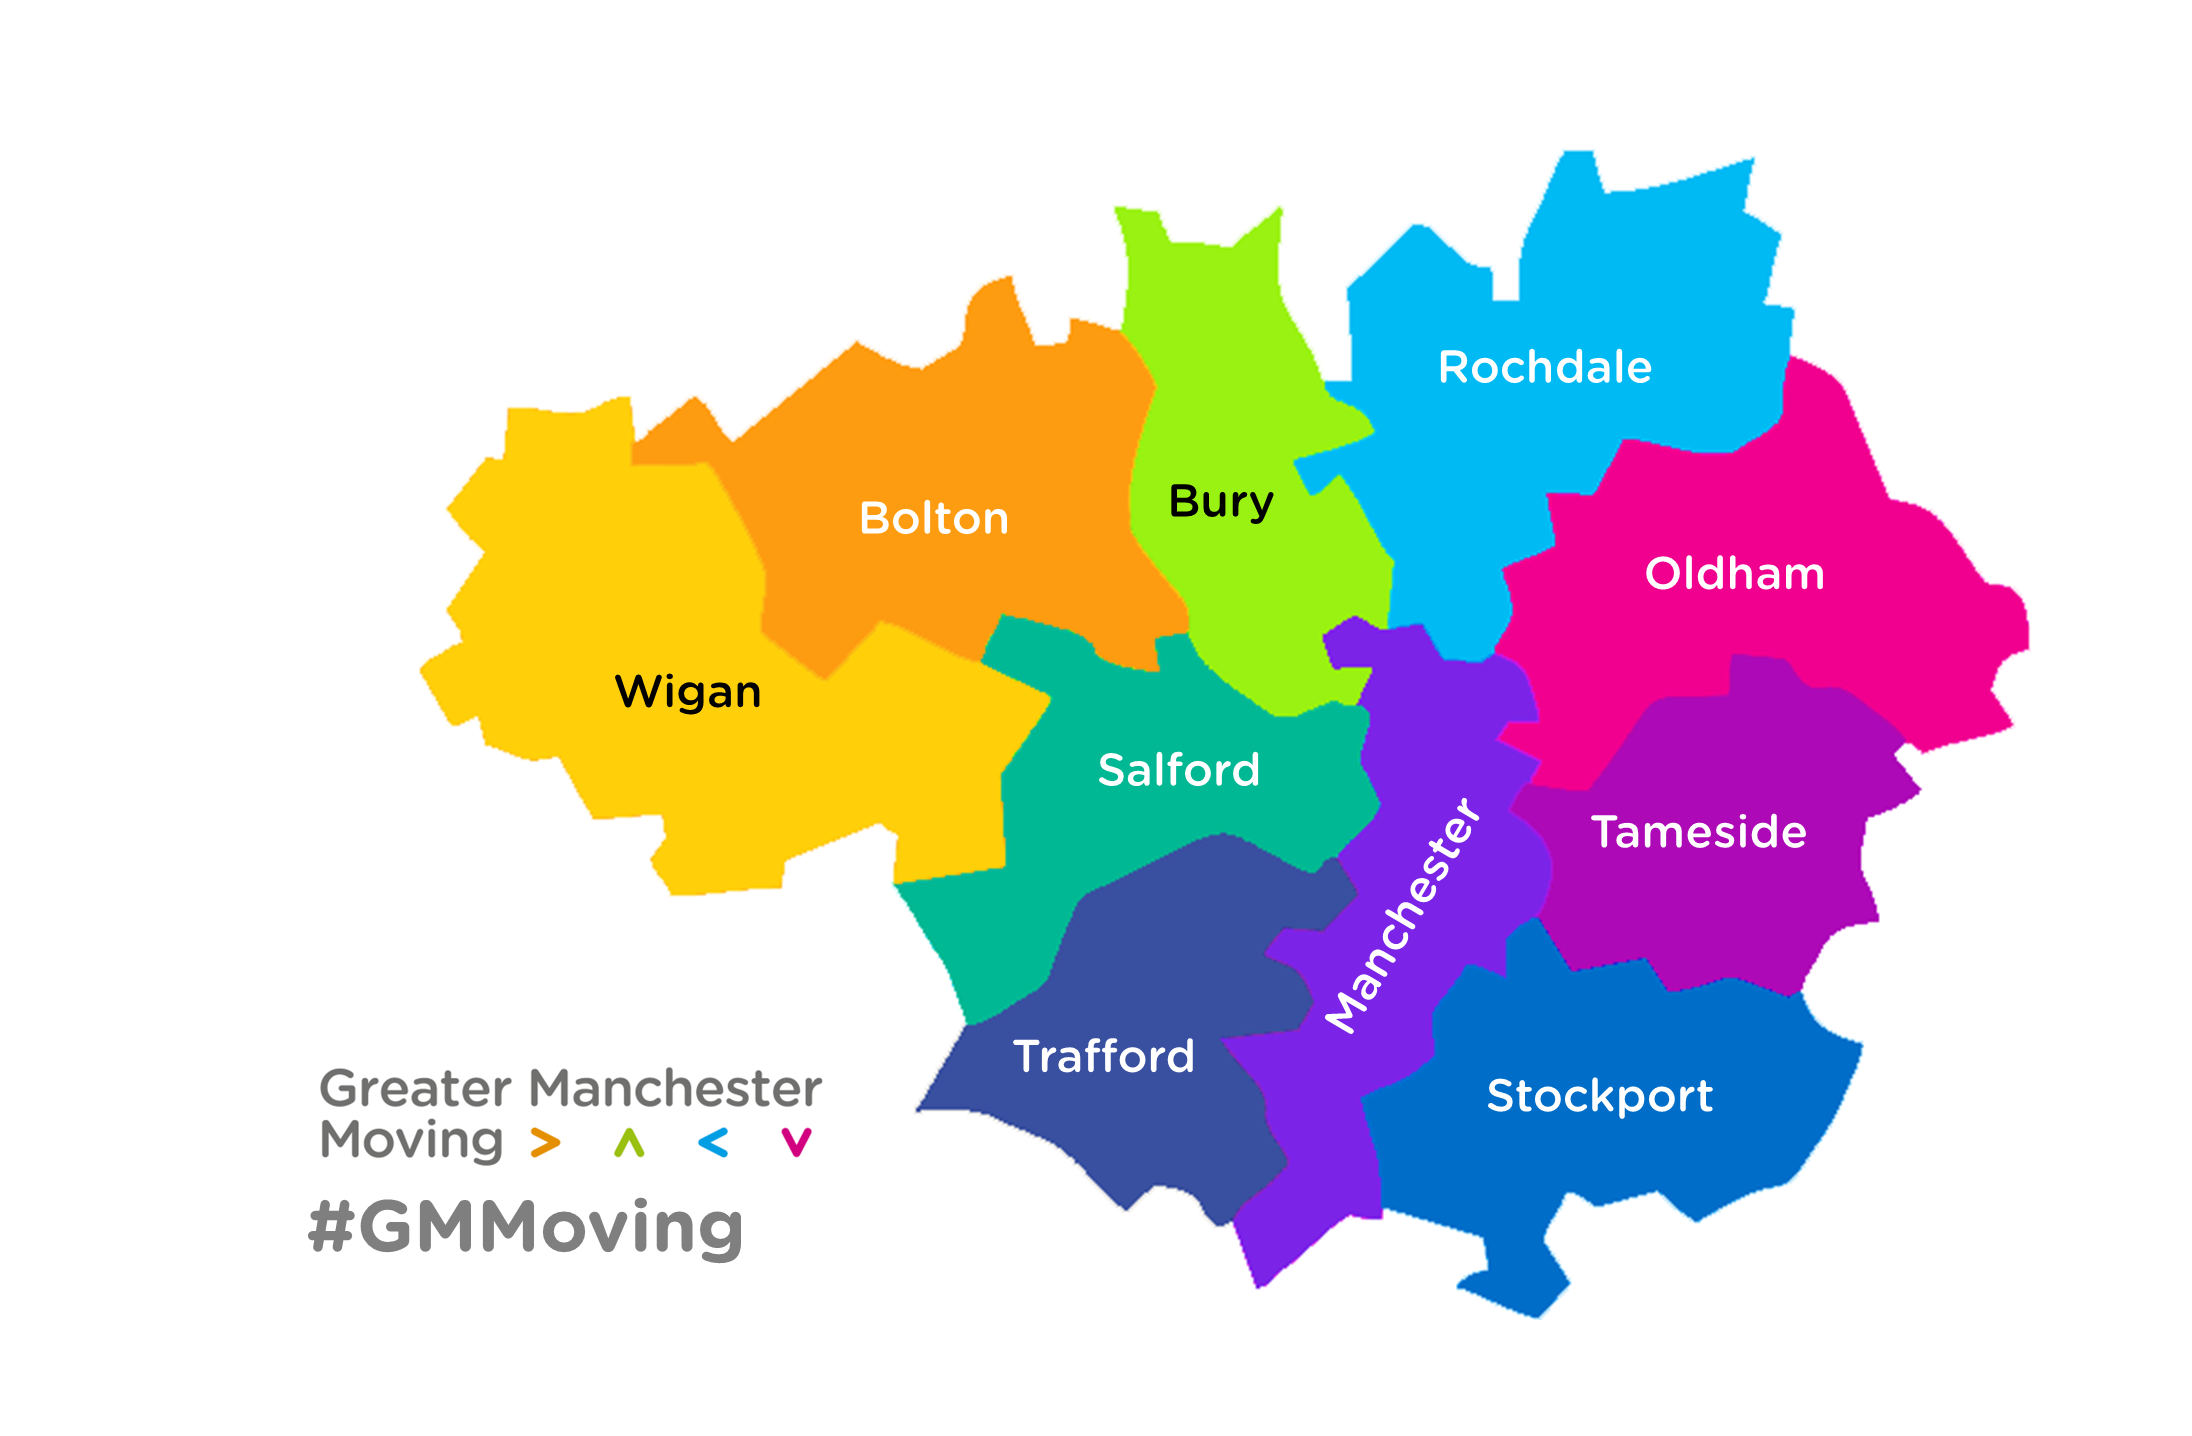 Greater Manchester localities mapped out (Wigan, Bolton, Bury, Rochdale, Oldham, Tameside, Stockport, Manchester, Trafford and Salford.)